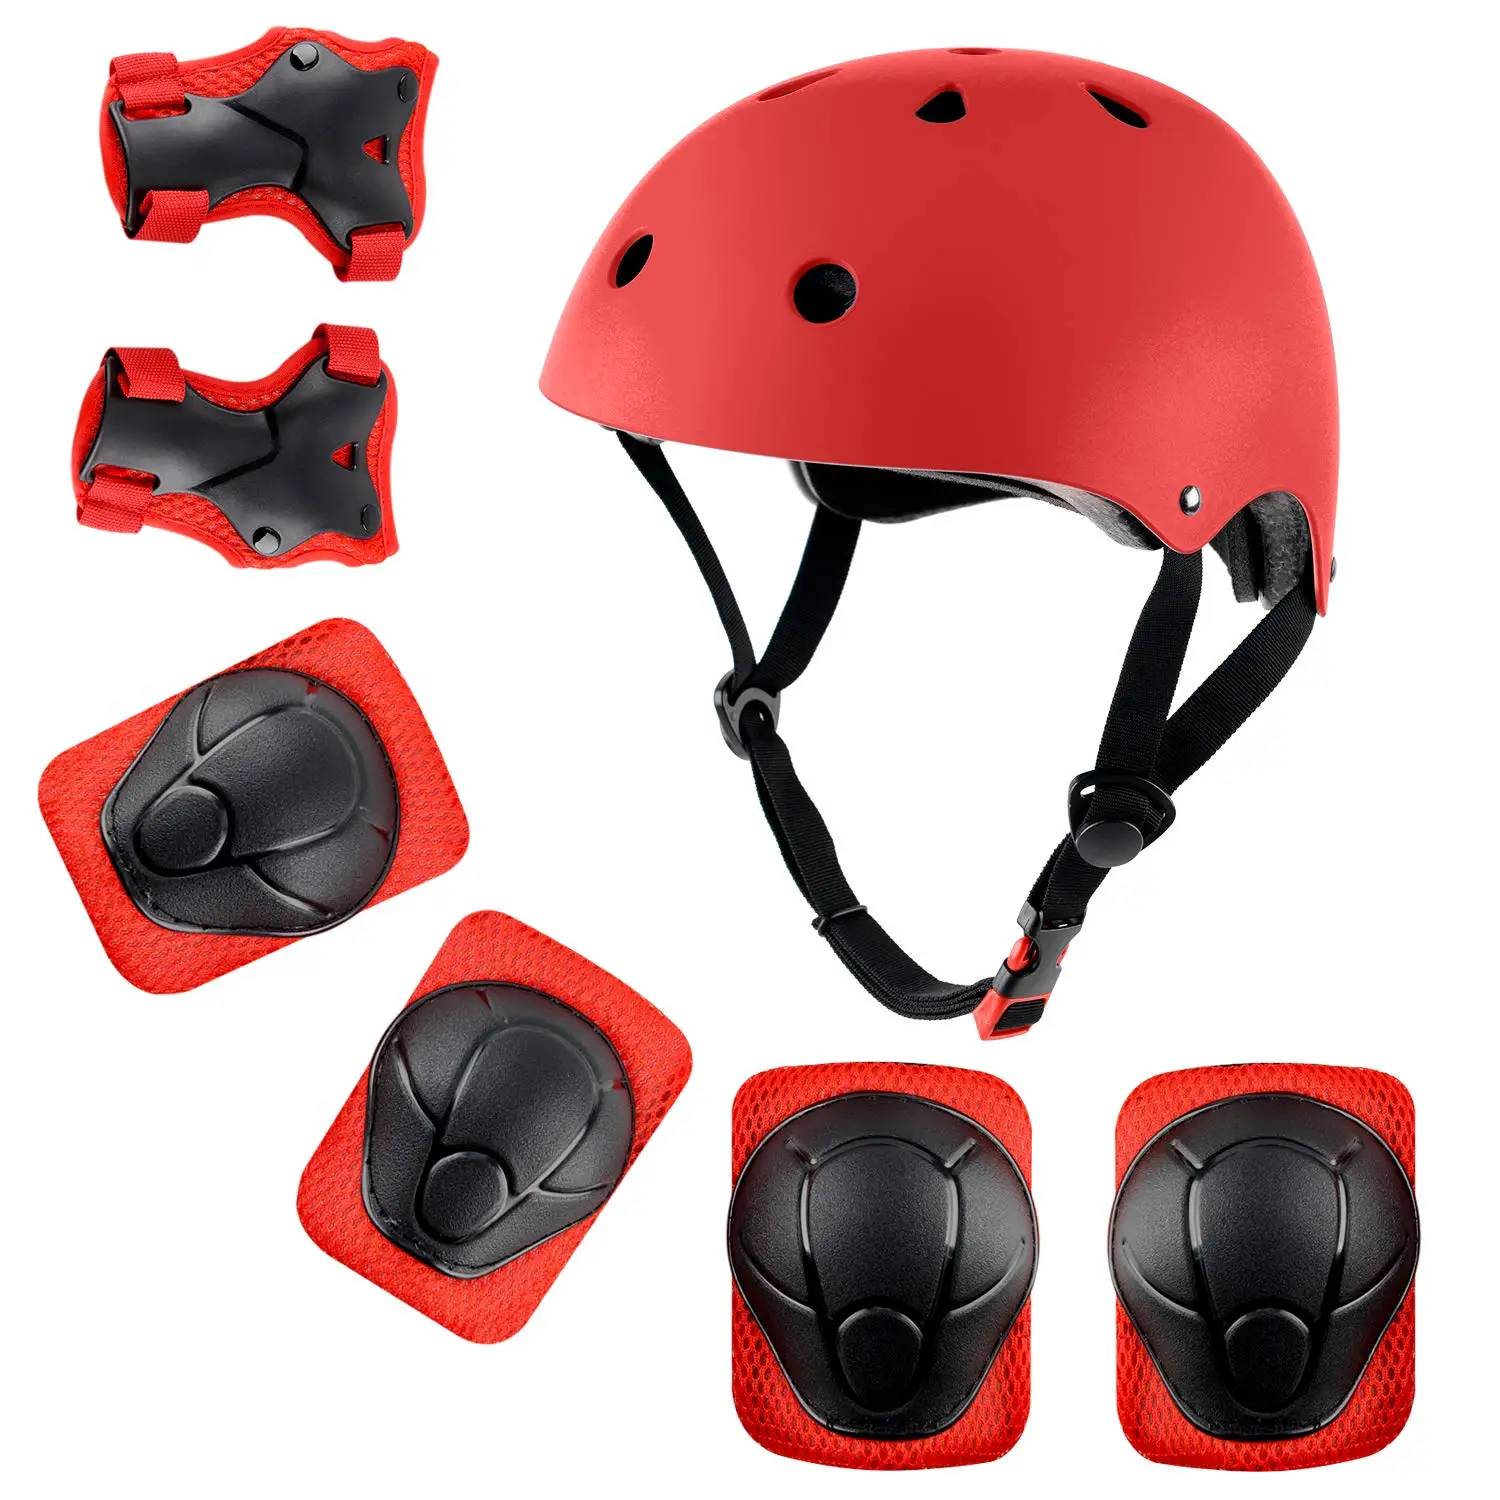 Xc-Sport Kids Protective Gear Set Helmet Knee Pads Elbow Guards Cycling Skating 